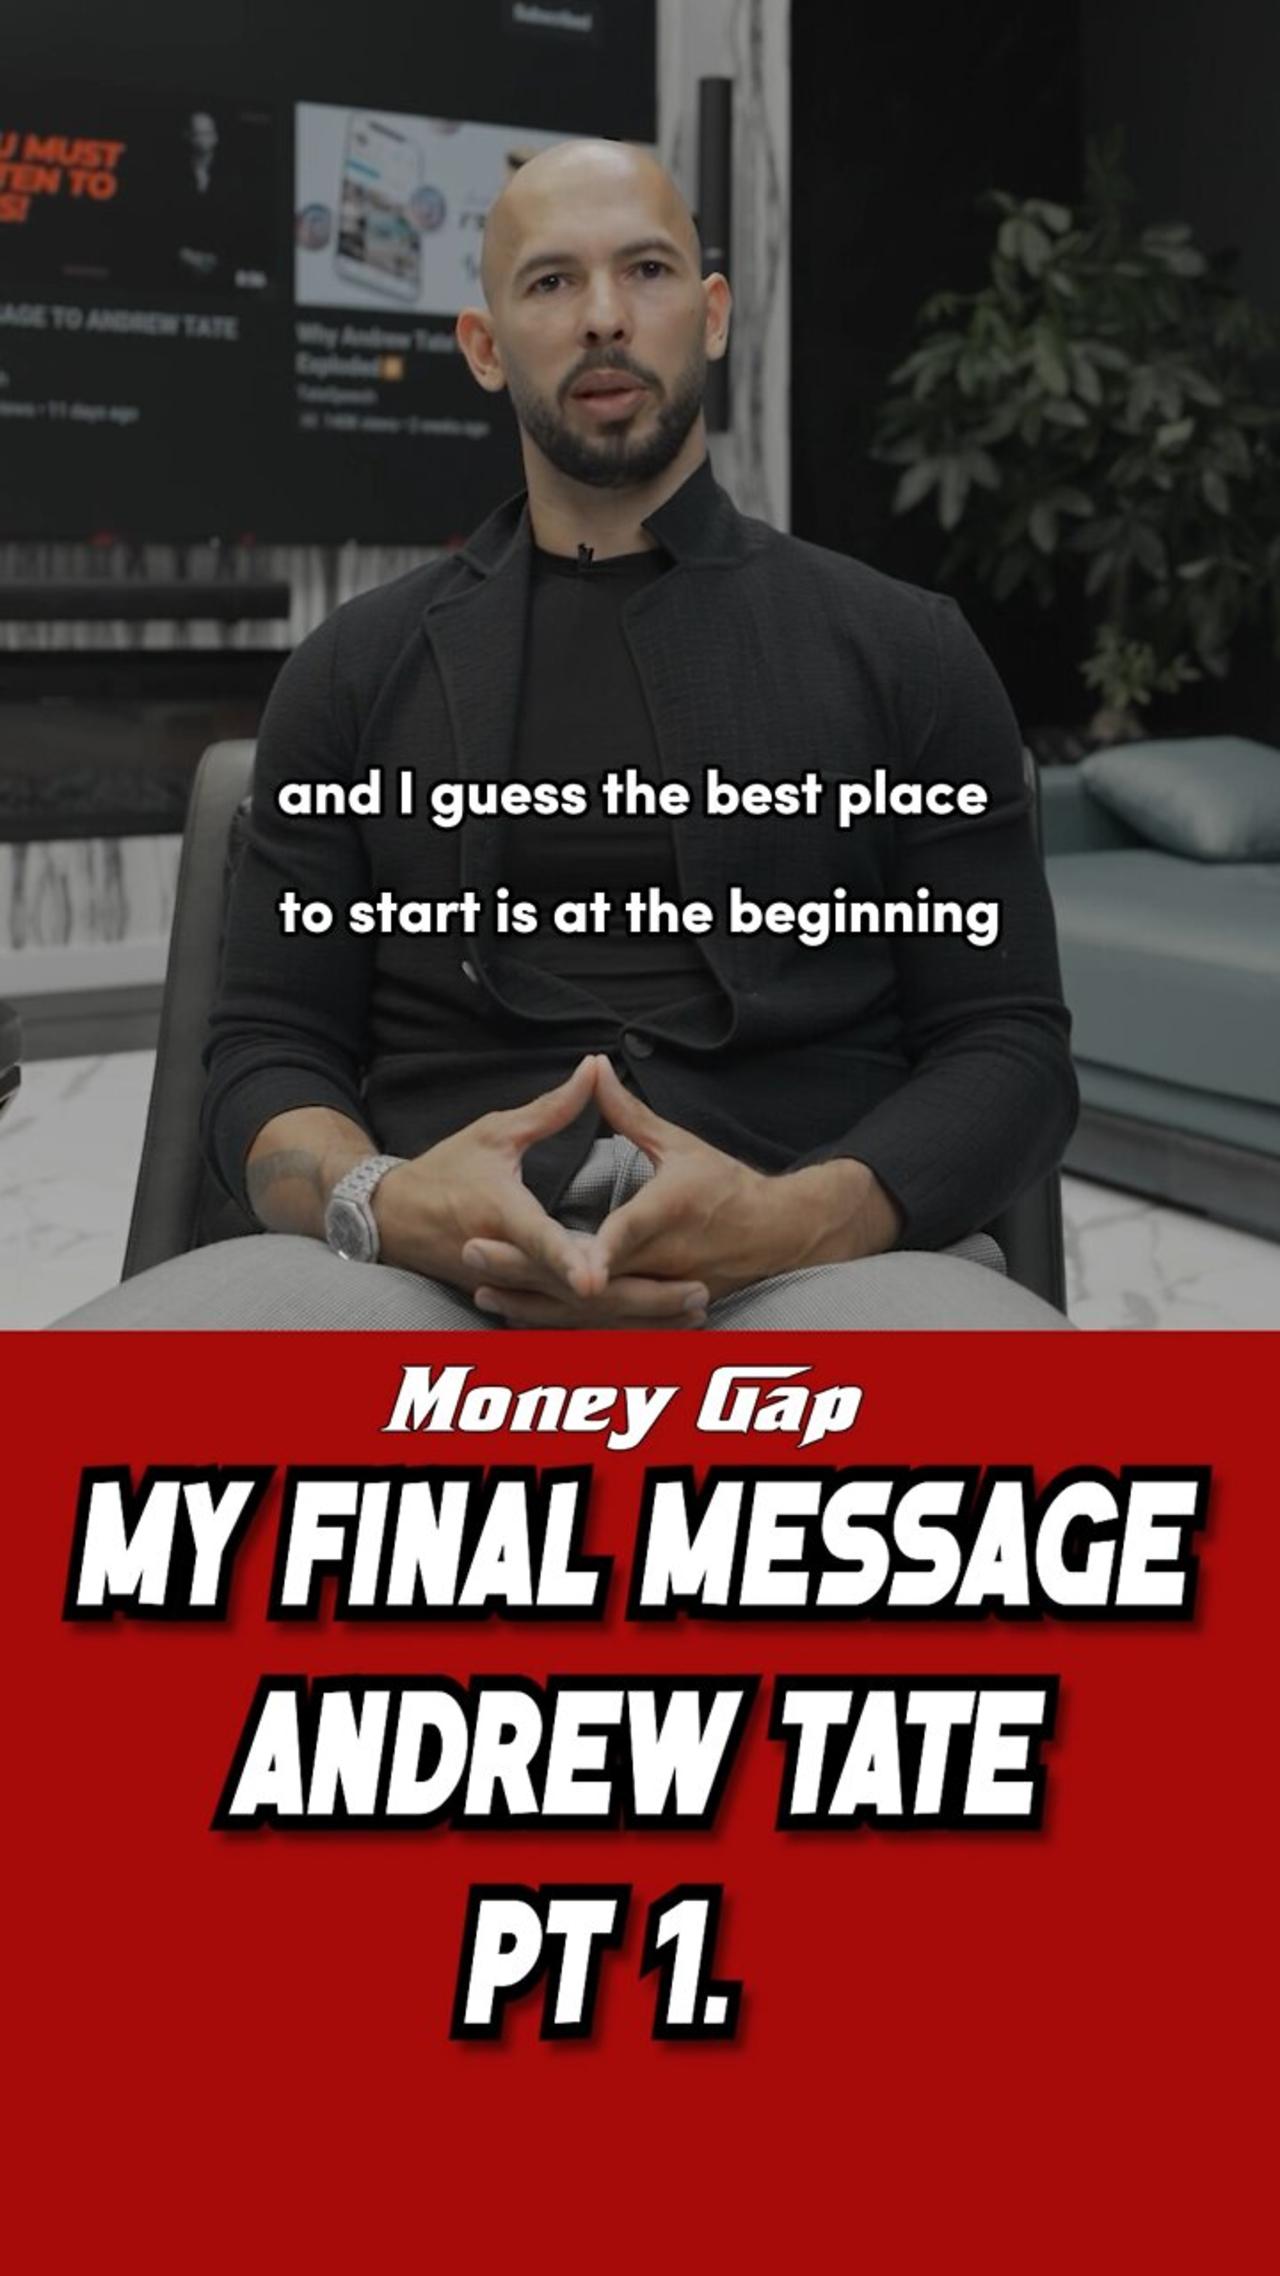 Andrew Tate's Final Message pt 1.